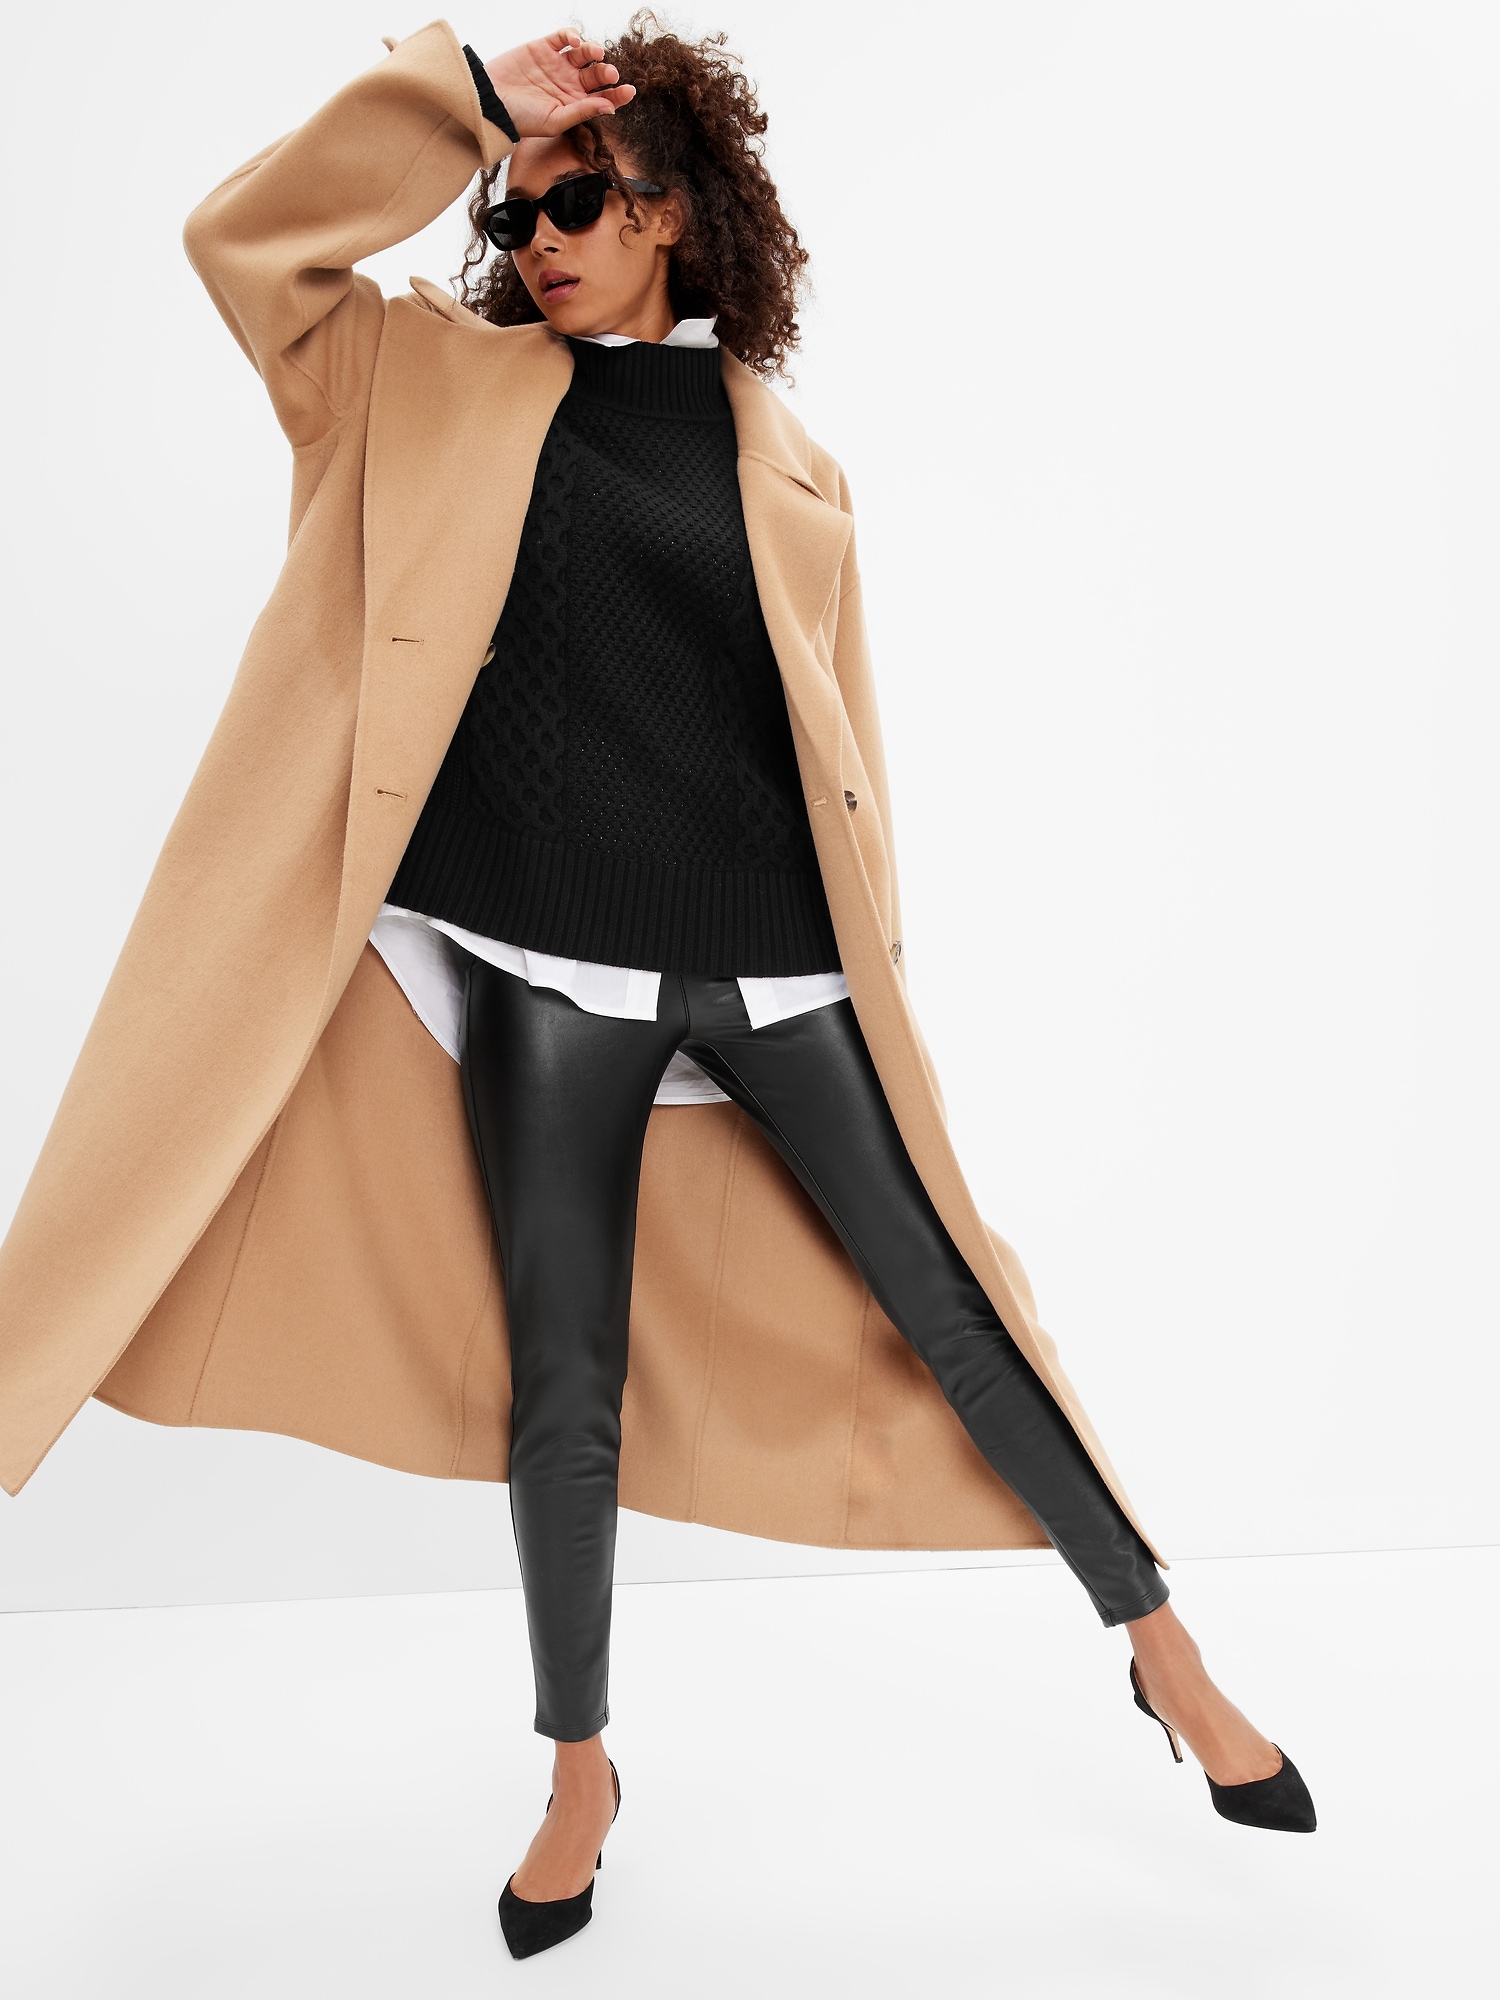 Buy Gap Faux-Leather Leggings from the Gap online shop